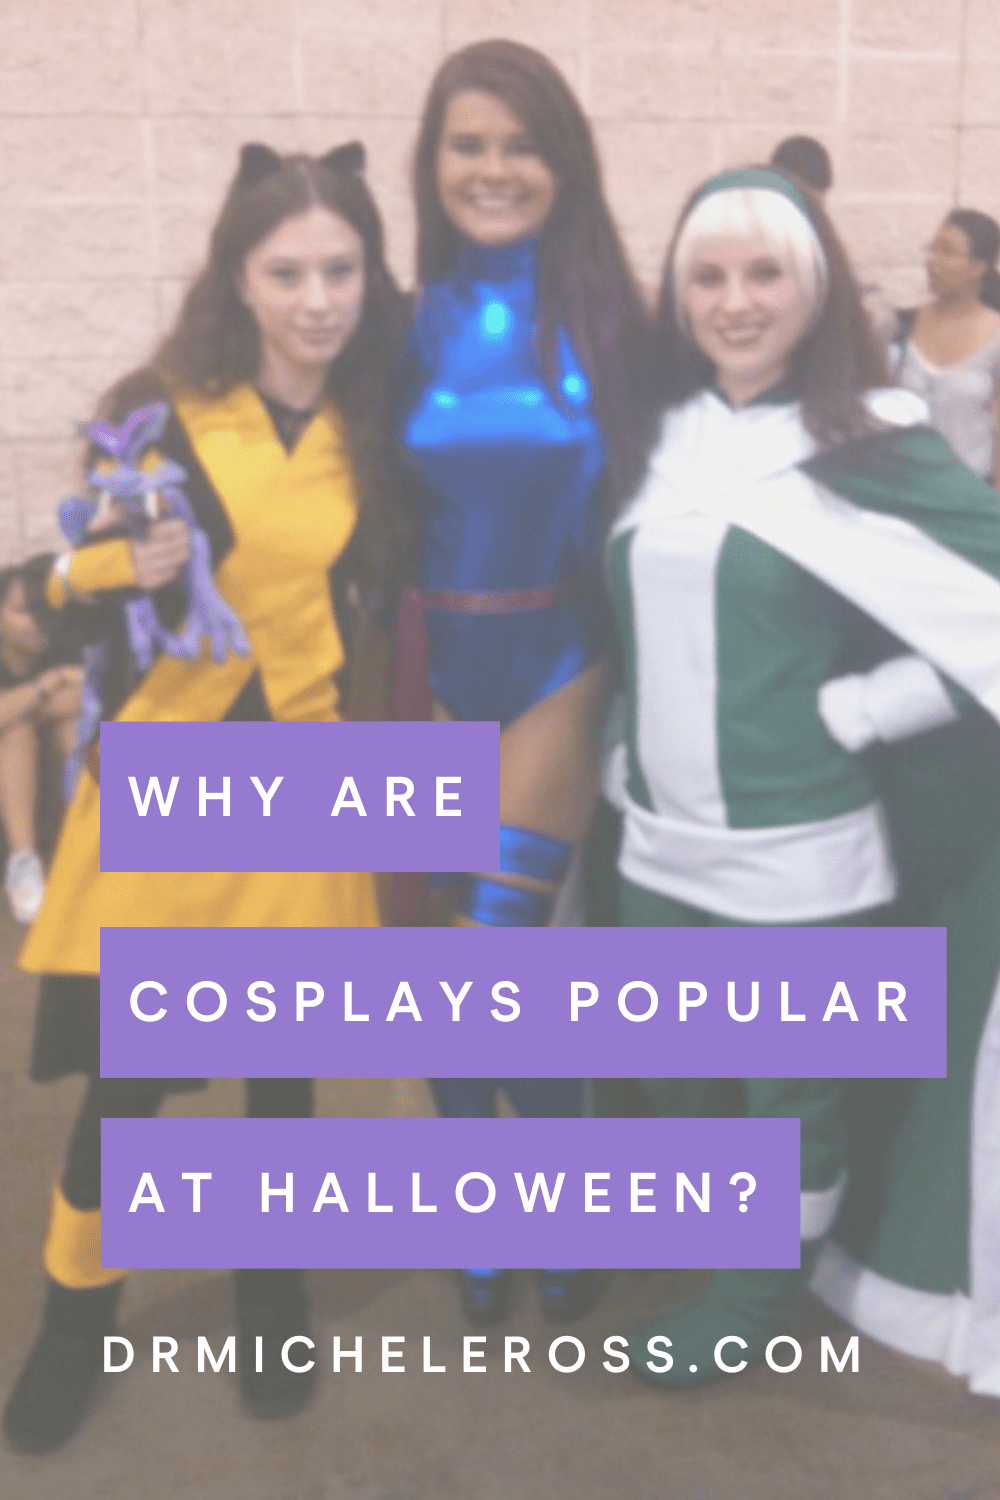 Why Are Cosplays Popular at Halloween?